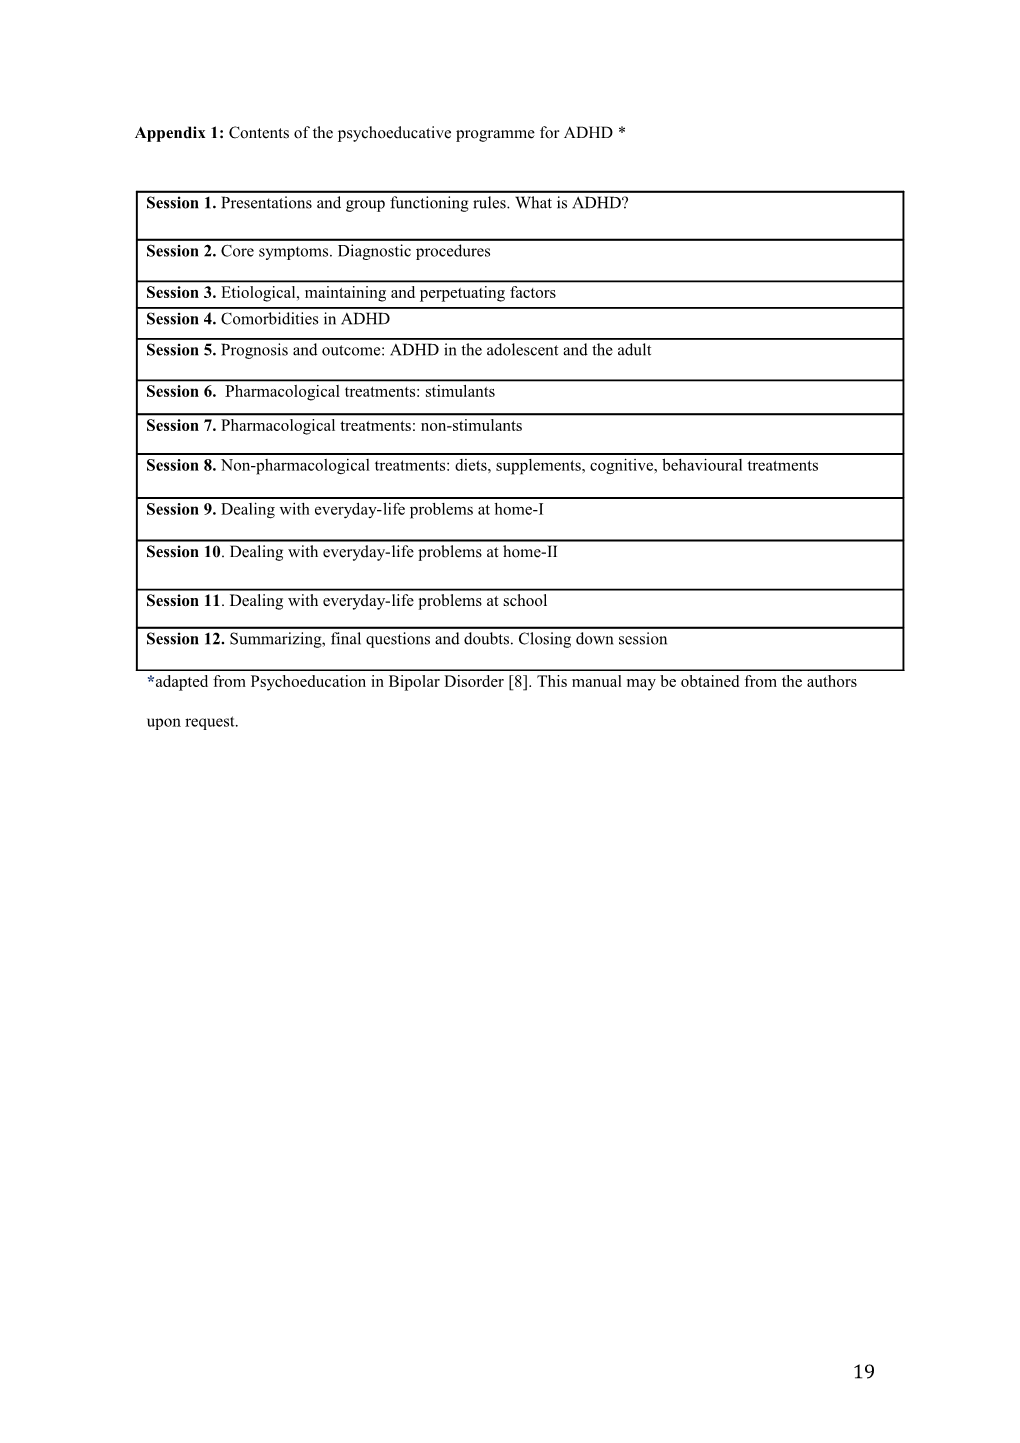 Appendix 1: Contents of the Psychoeducative Programme for ADHD *